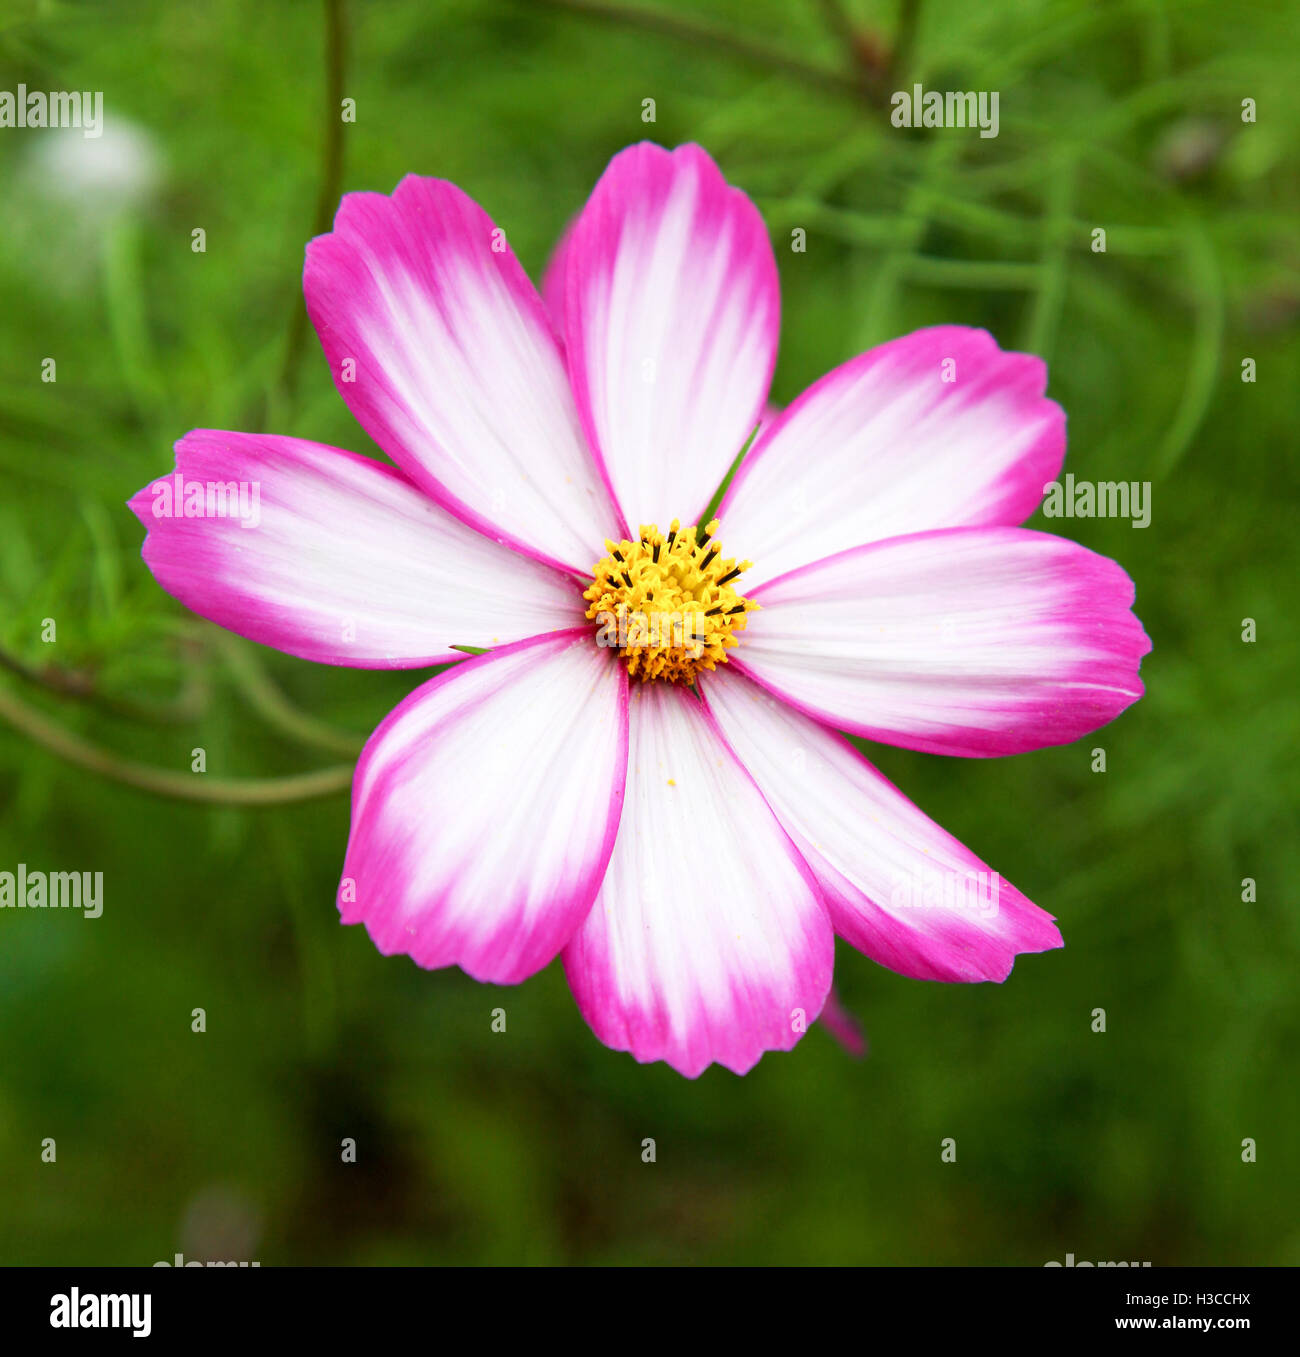 The pink and white flower head of a Picotee Cosmos flower Stock Photo